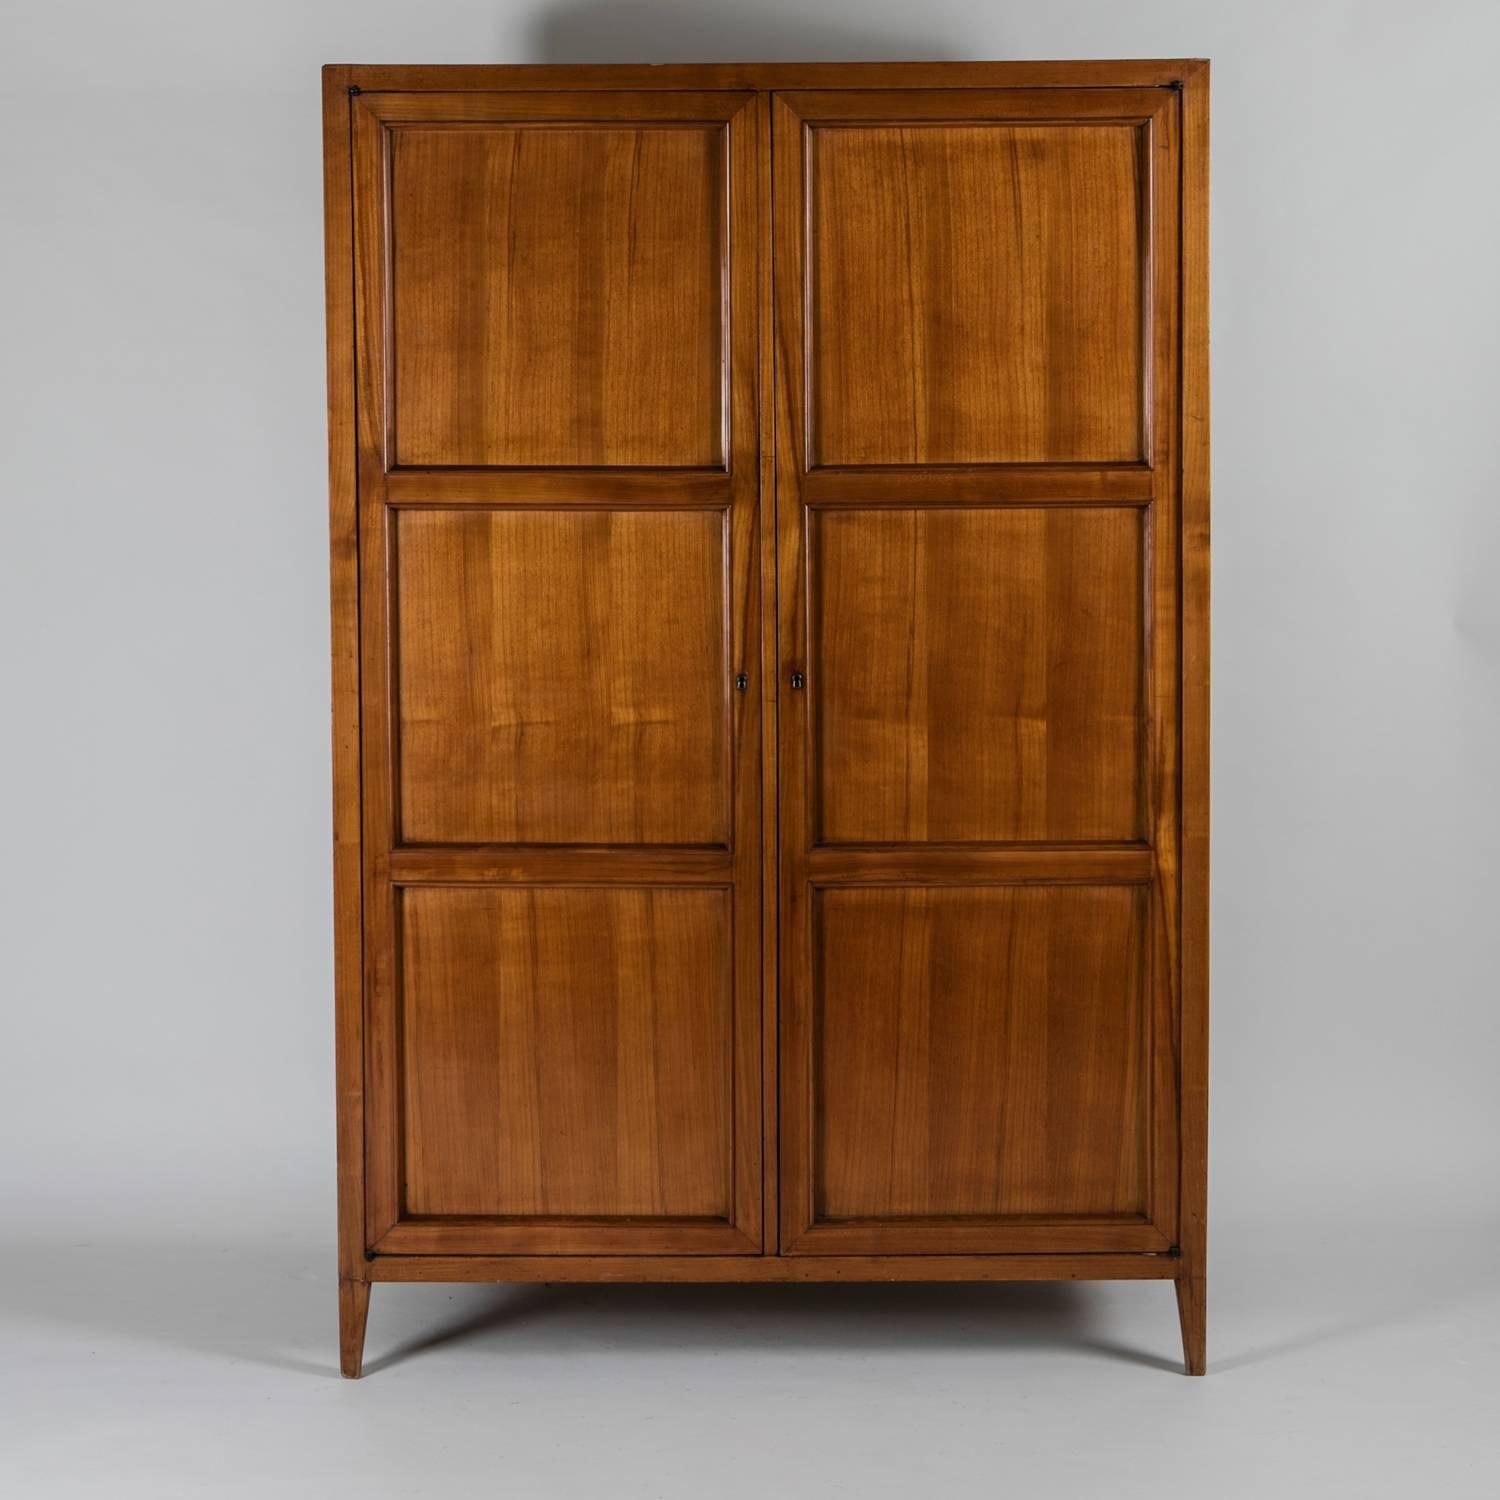 Marvelous cabinet by Paolo Buffa by Marelli and Colico, for Casa B. at Salò.
 